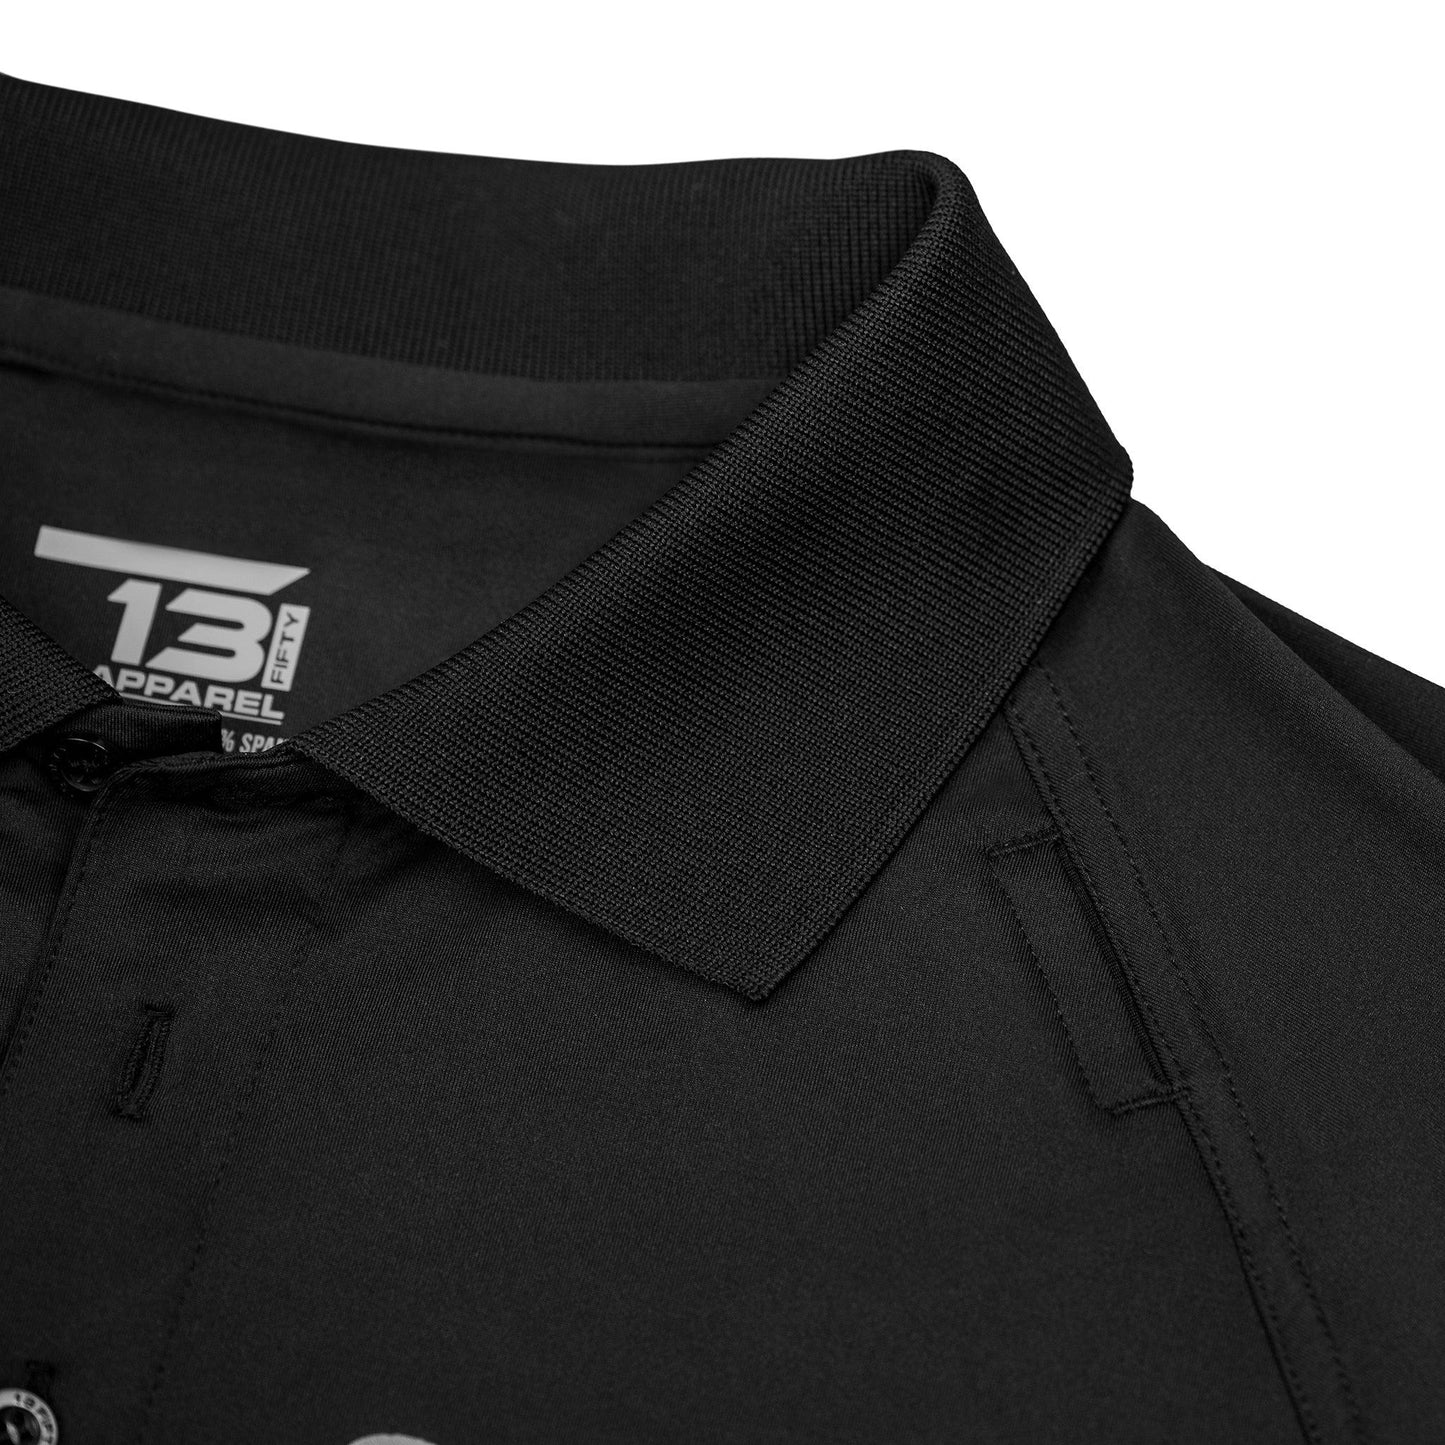 [SWAT] Men's Performance Polo [BLK/GRN]-13 Fifty Apparel